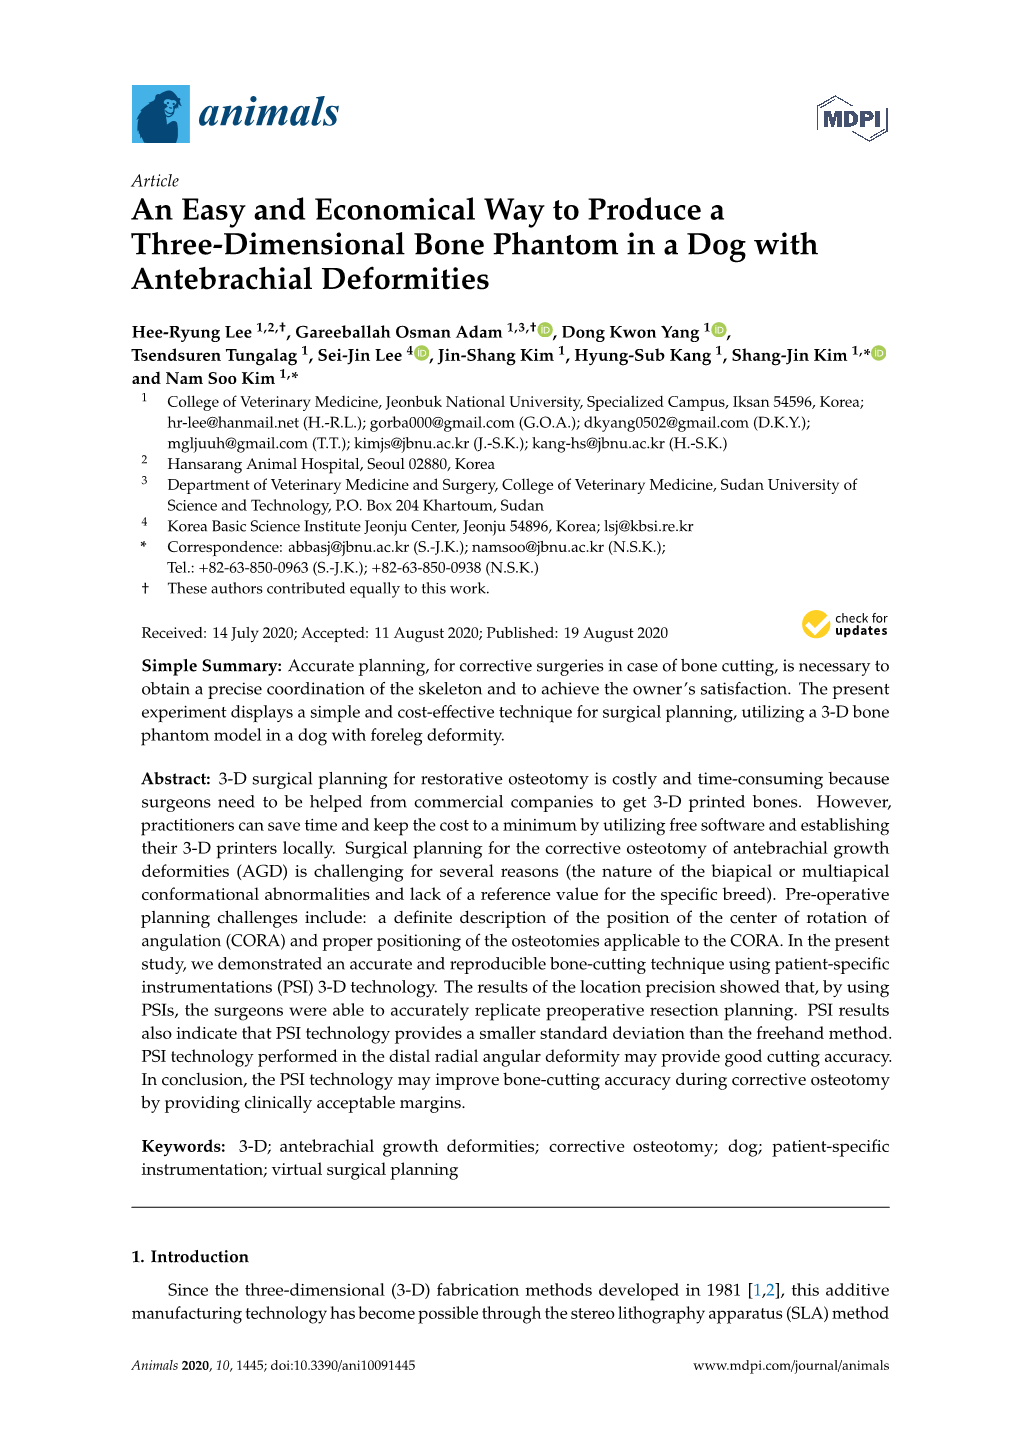 An Easy and Economical Way to Produce a Three-Dimensional Bone Phantom in a Dog with Antebrachial Deformities